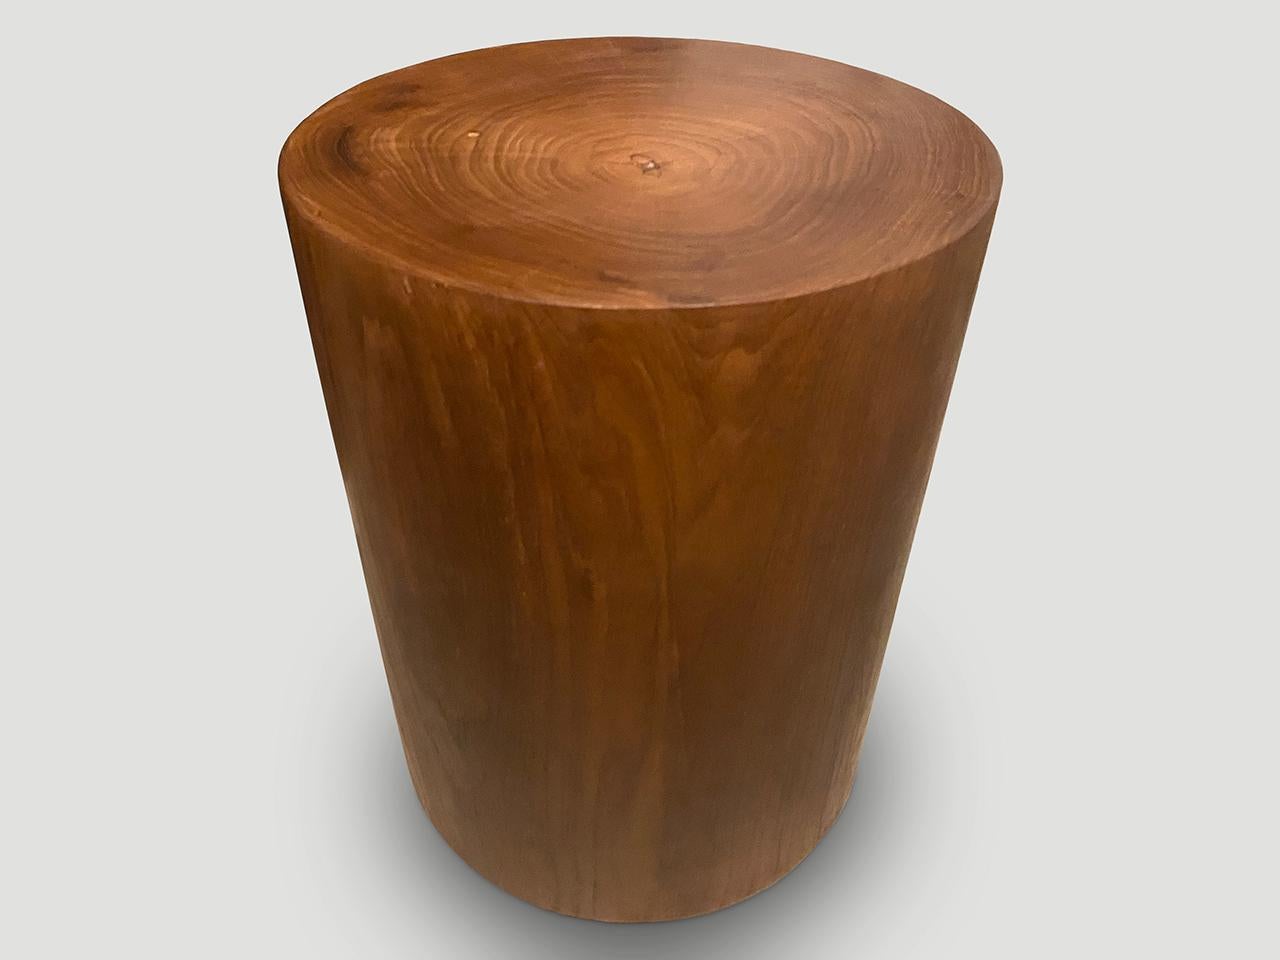 Beautiful rare rosewood side table with contrasting tones. Finished with a natural oil revealing the stunning wood grain. We have a collection. The price and images reflect the one shown.

Own an Andrianna Shamaris original.

Andrianna Shamaris. The